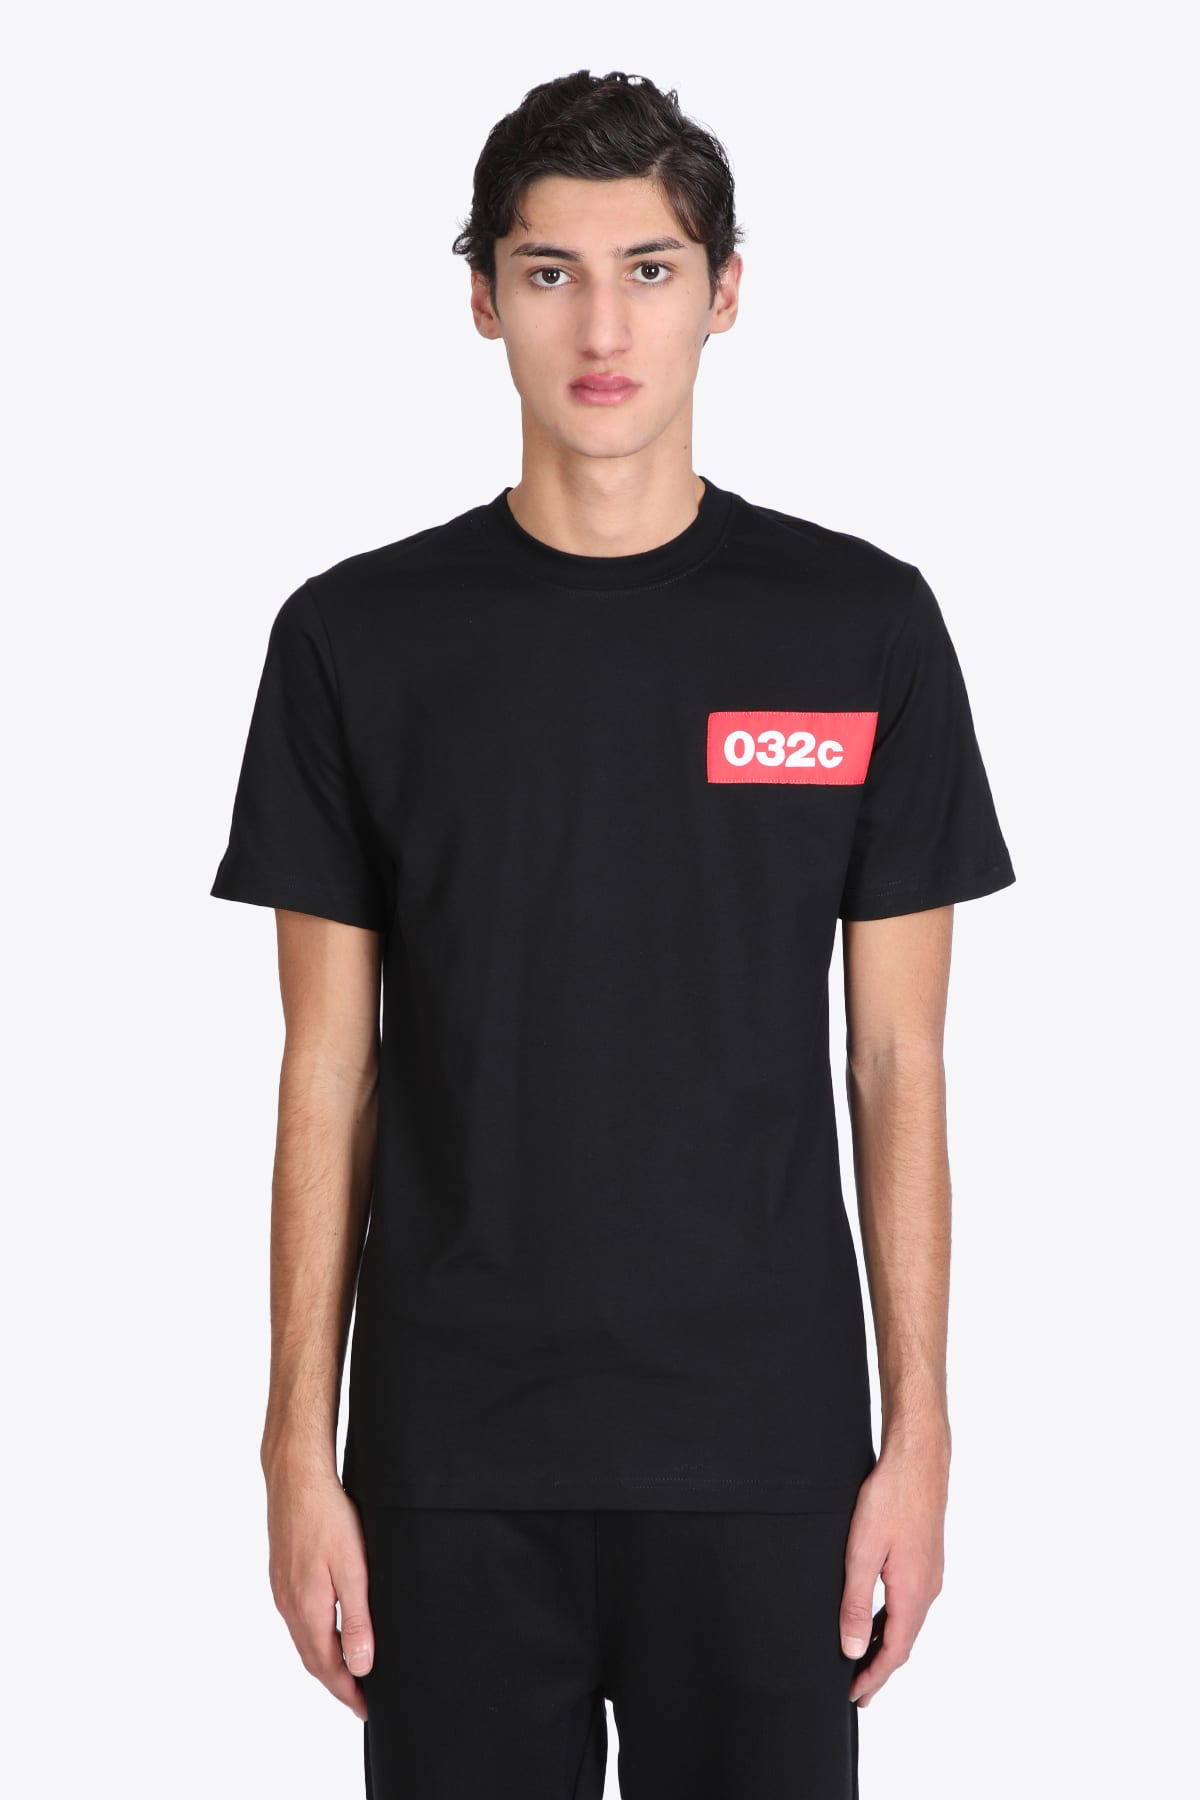 032C 032C TAPED TEE BLACK COTTON T-SHIRT WITH CHEST LOGO - TAPED TEE